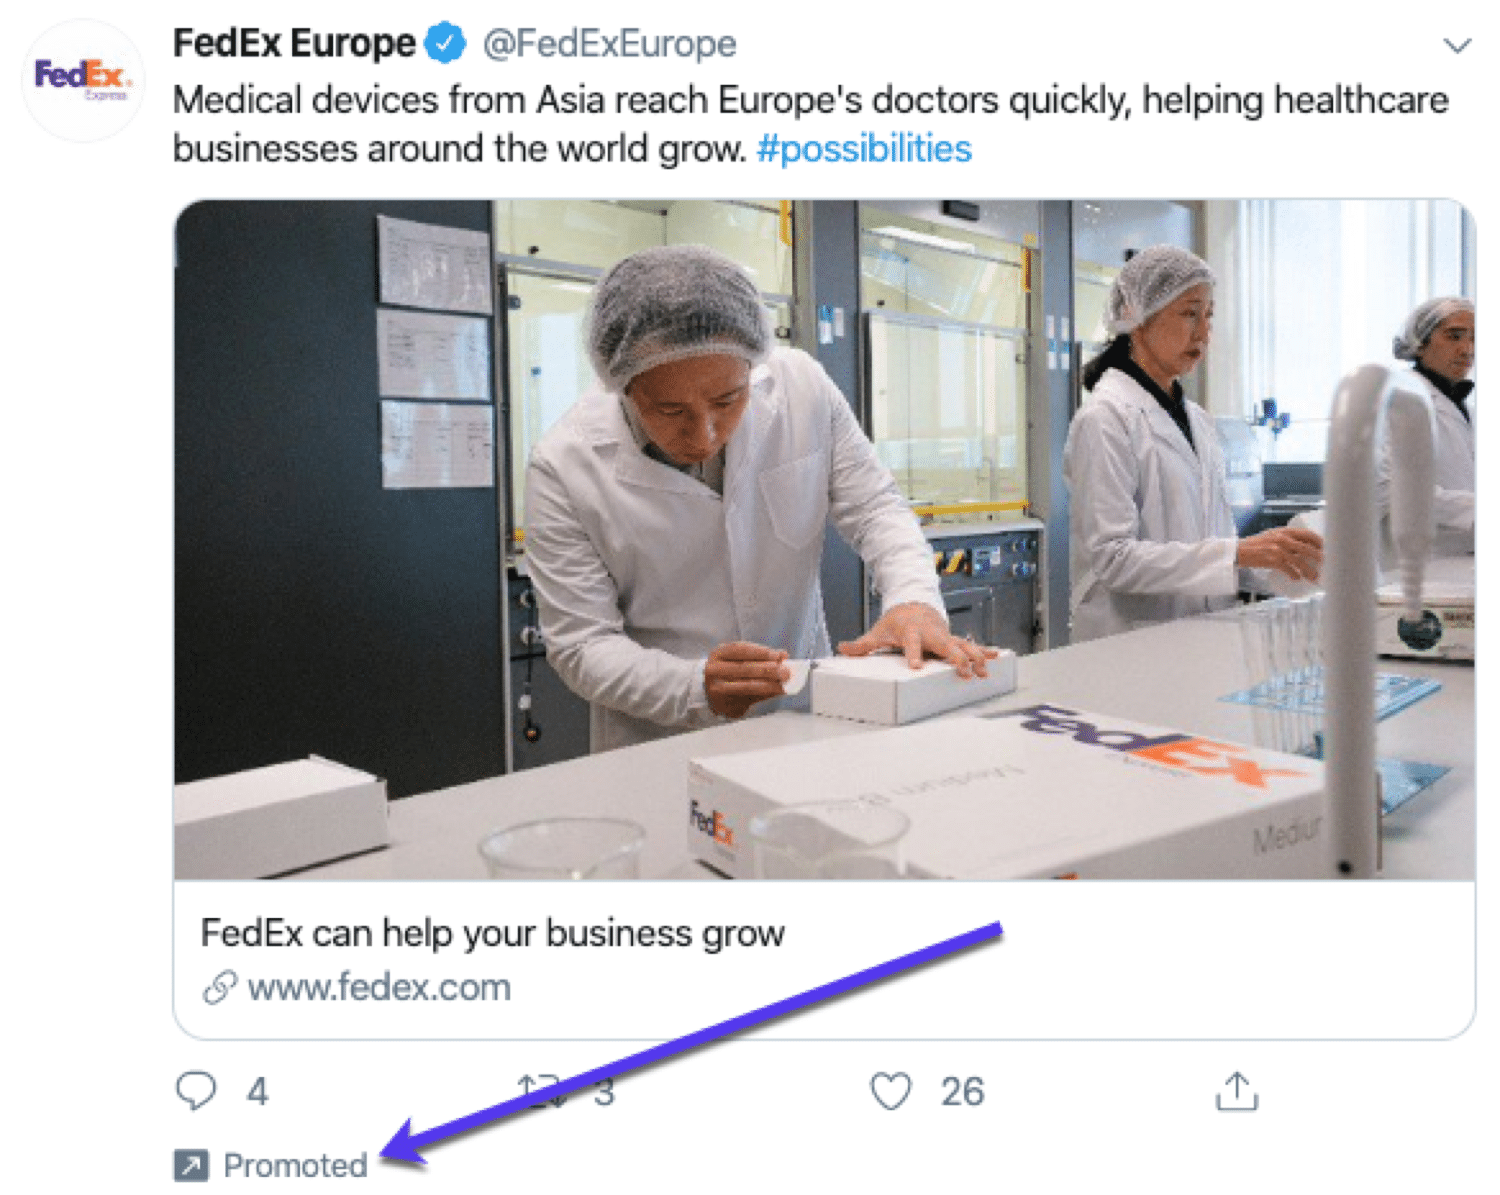 An example of a promoted tweet